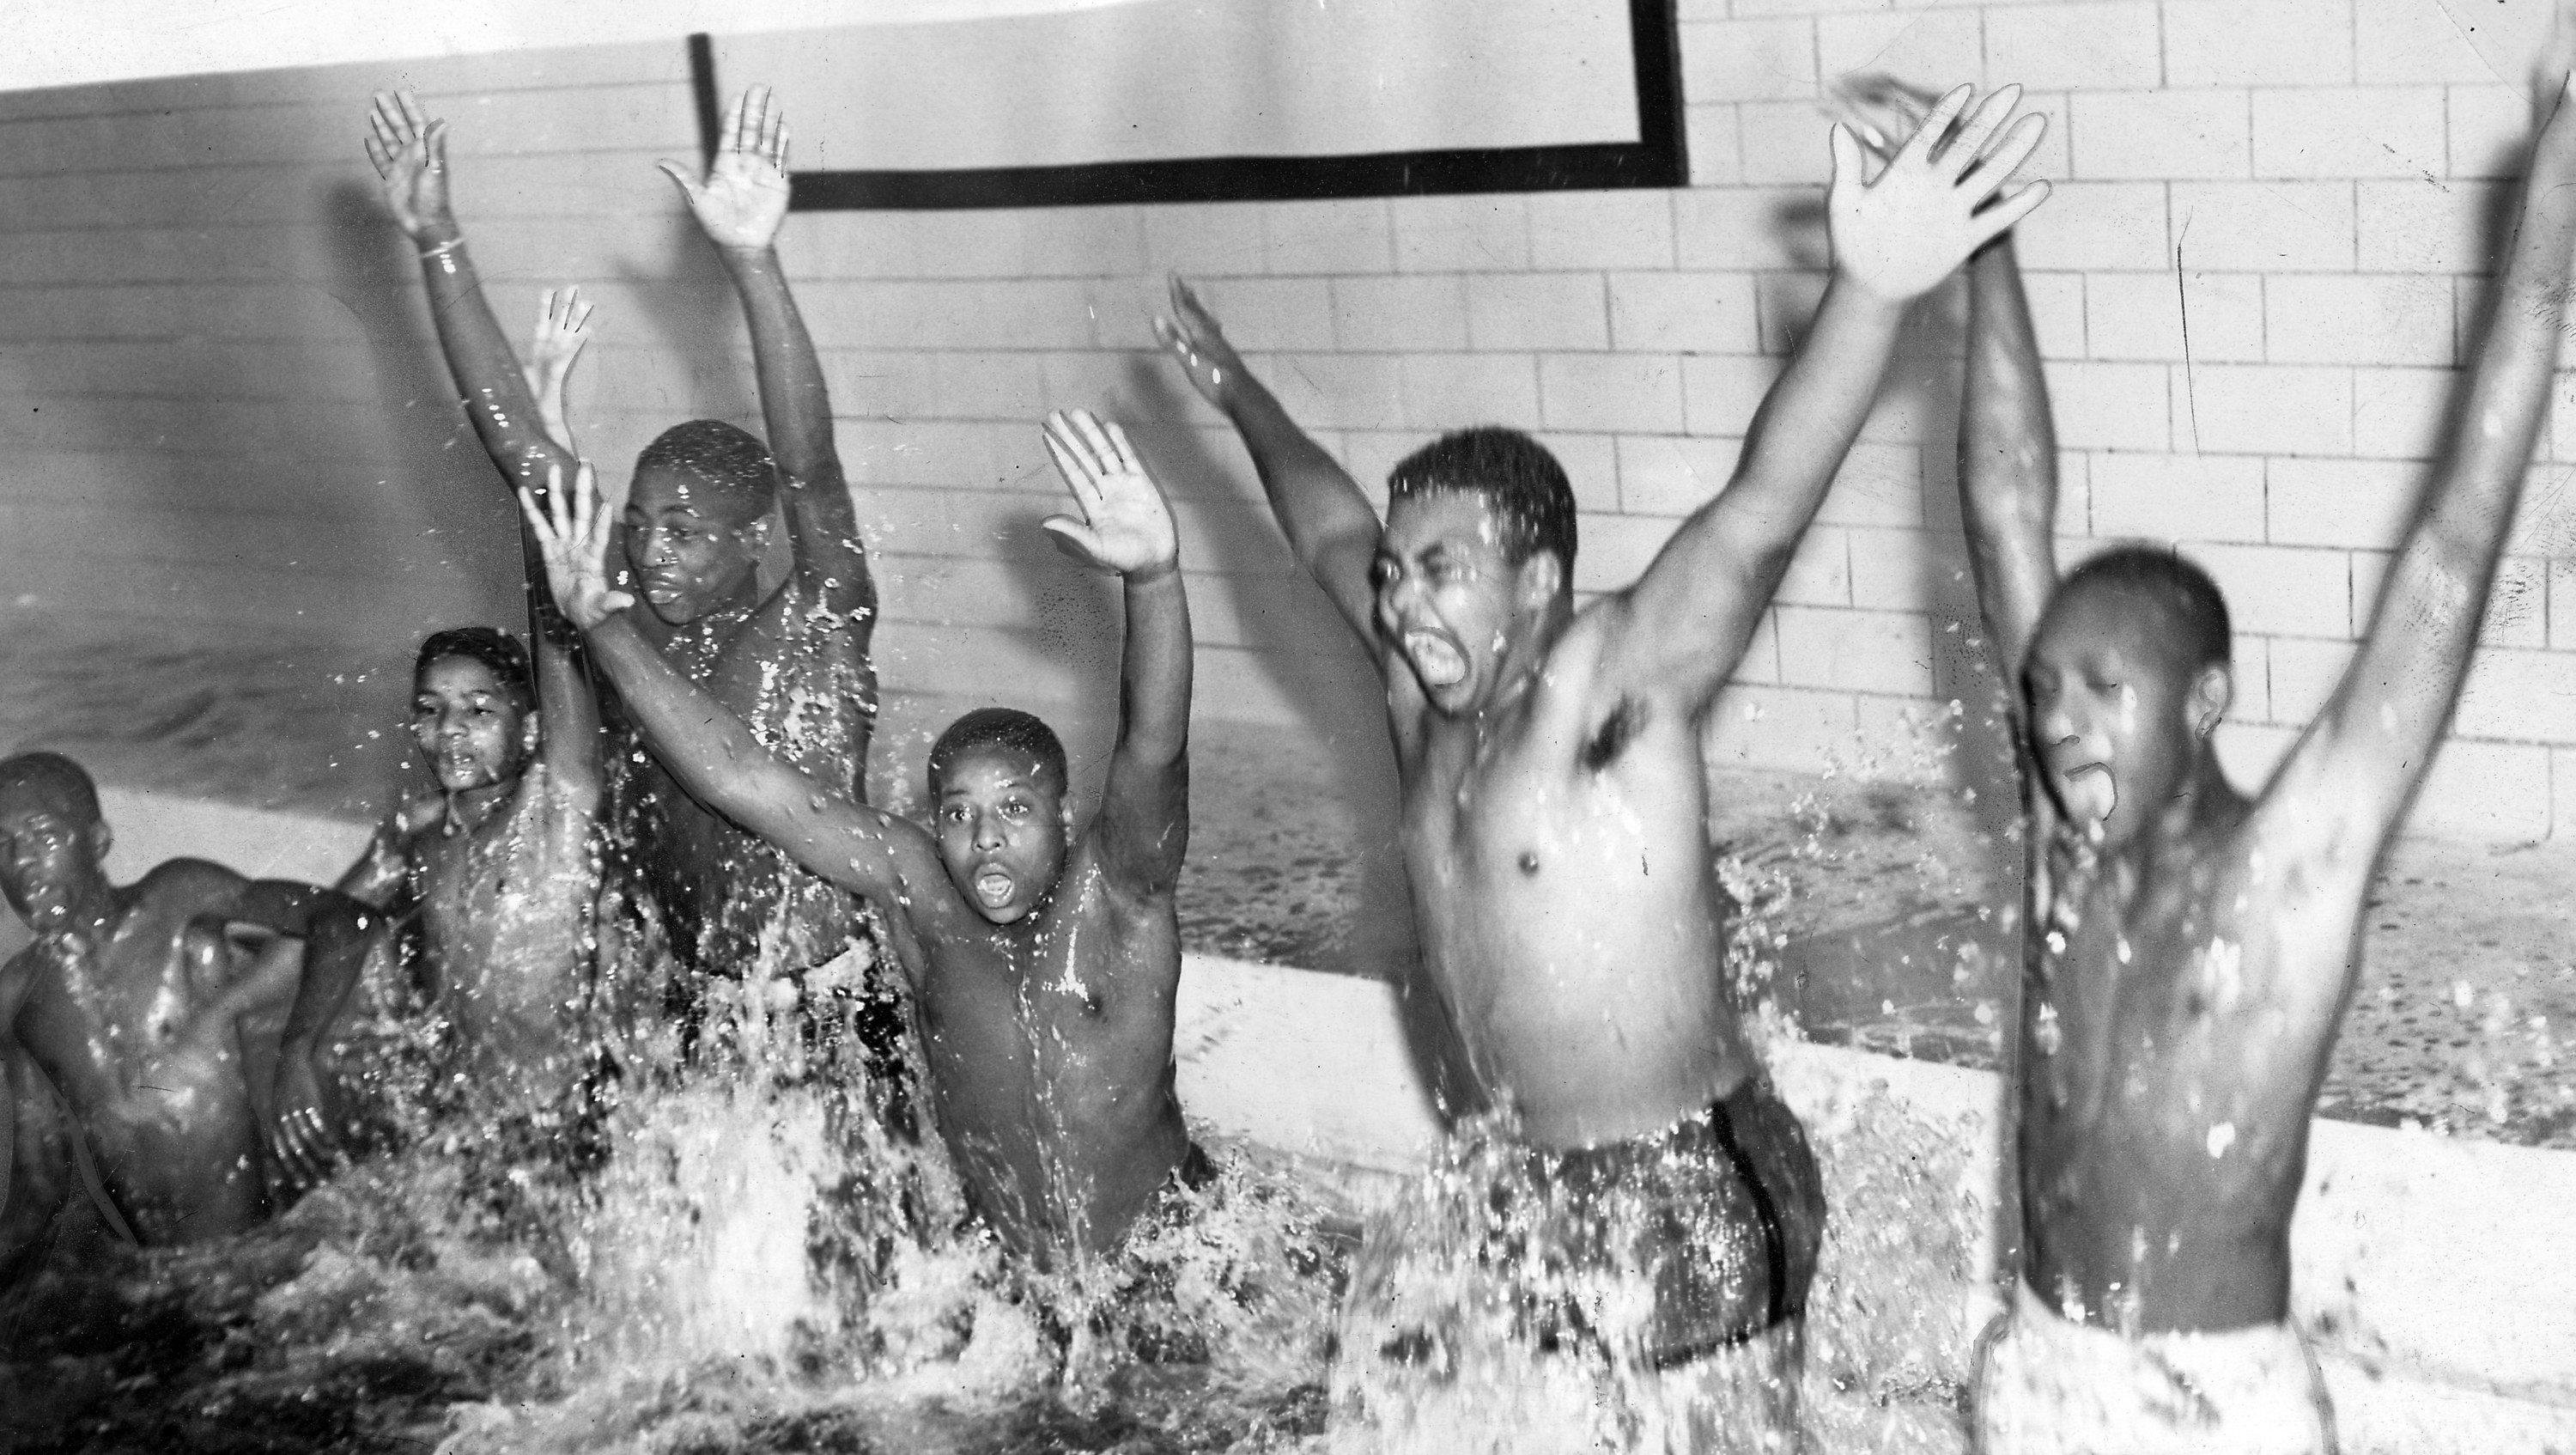 A photo of Black youth swimming in a segregated pool in Baltimore, MD